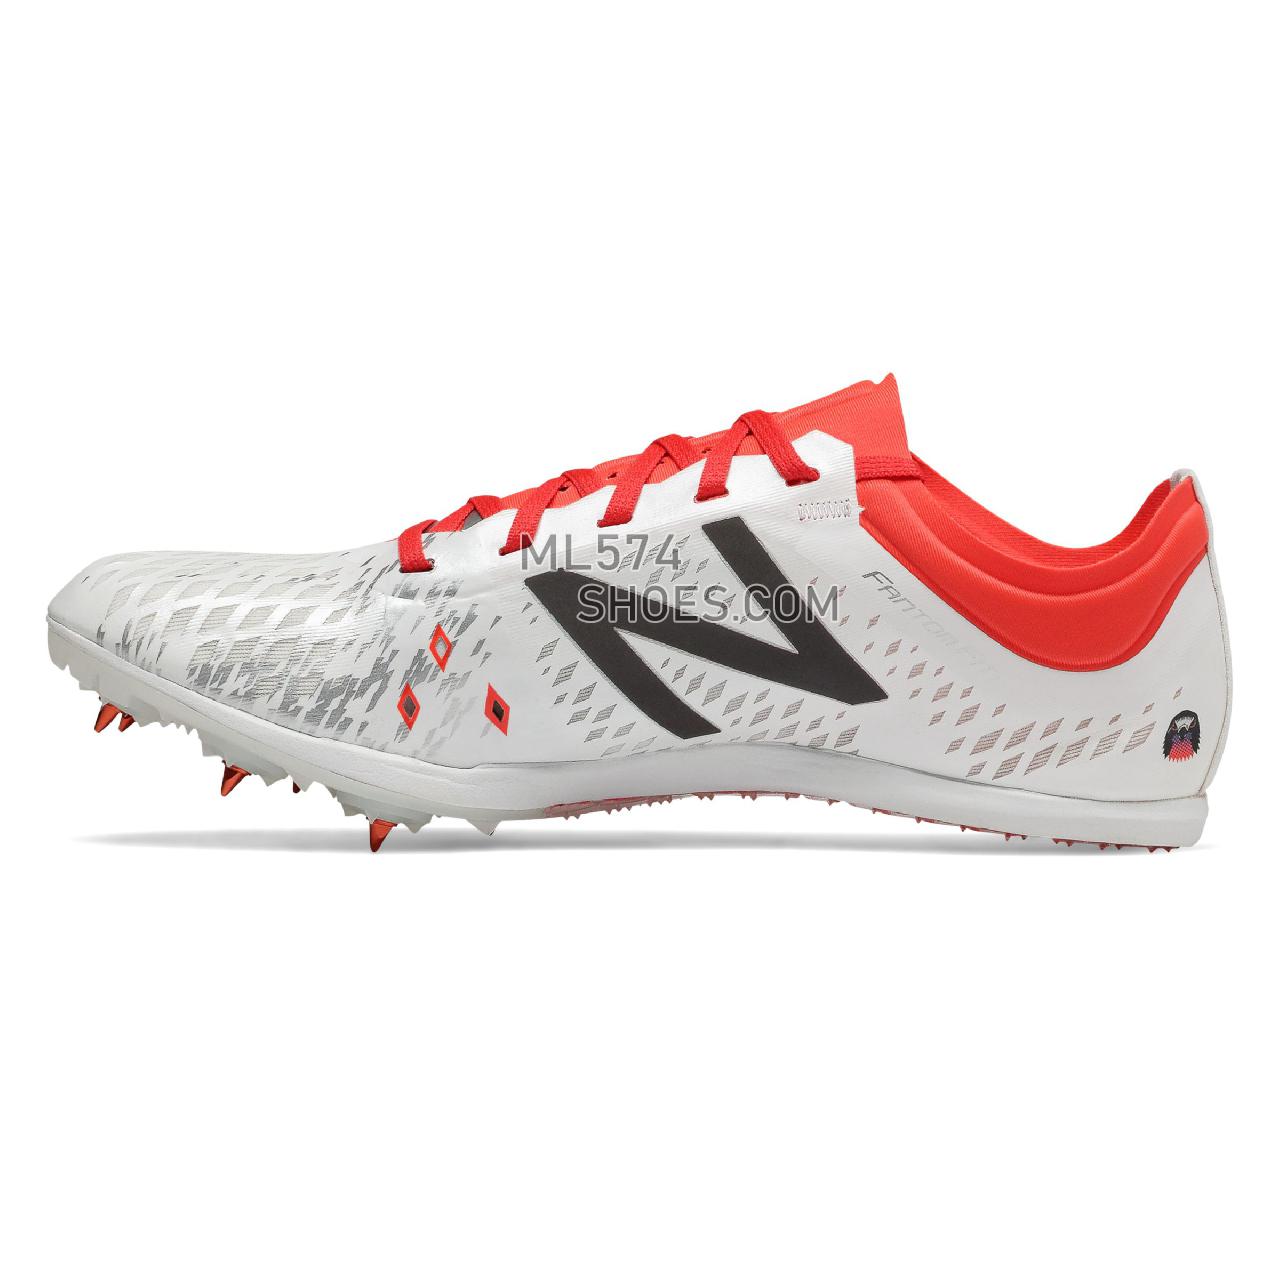 New Balance MD800v5 Spike - Women's Md800V5 Spike - Running - White with Flame and Black - WMD800F5